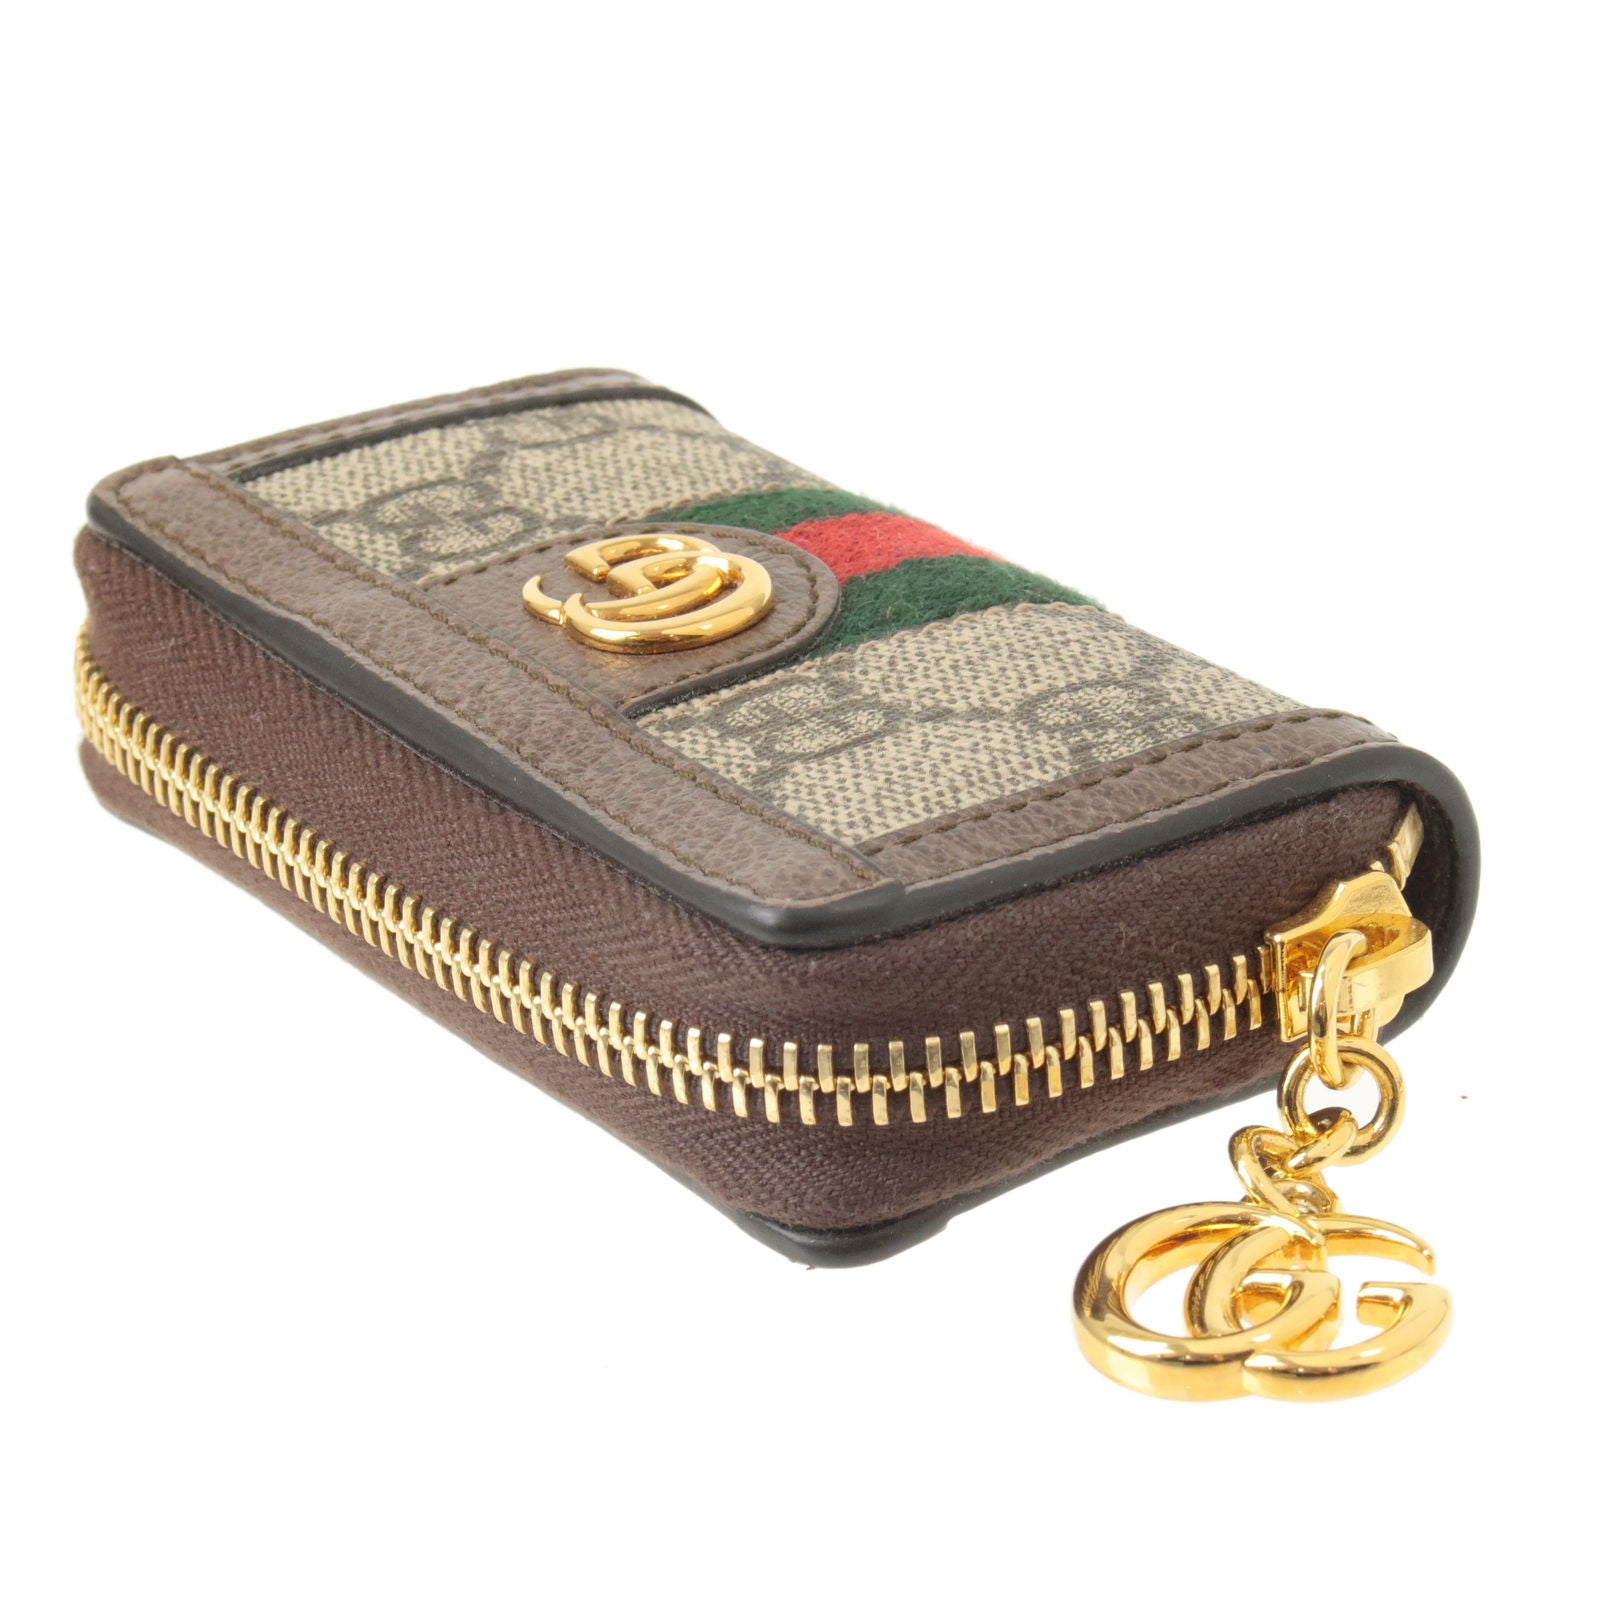 Authentic New in Box Gucci Ophidia Key Coin Chain Pouch With 